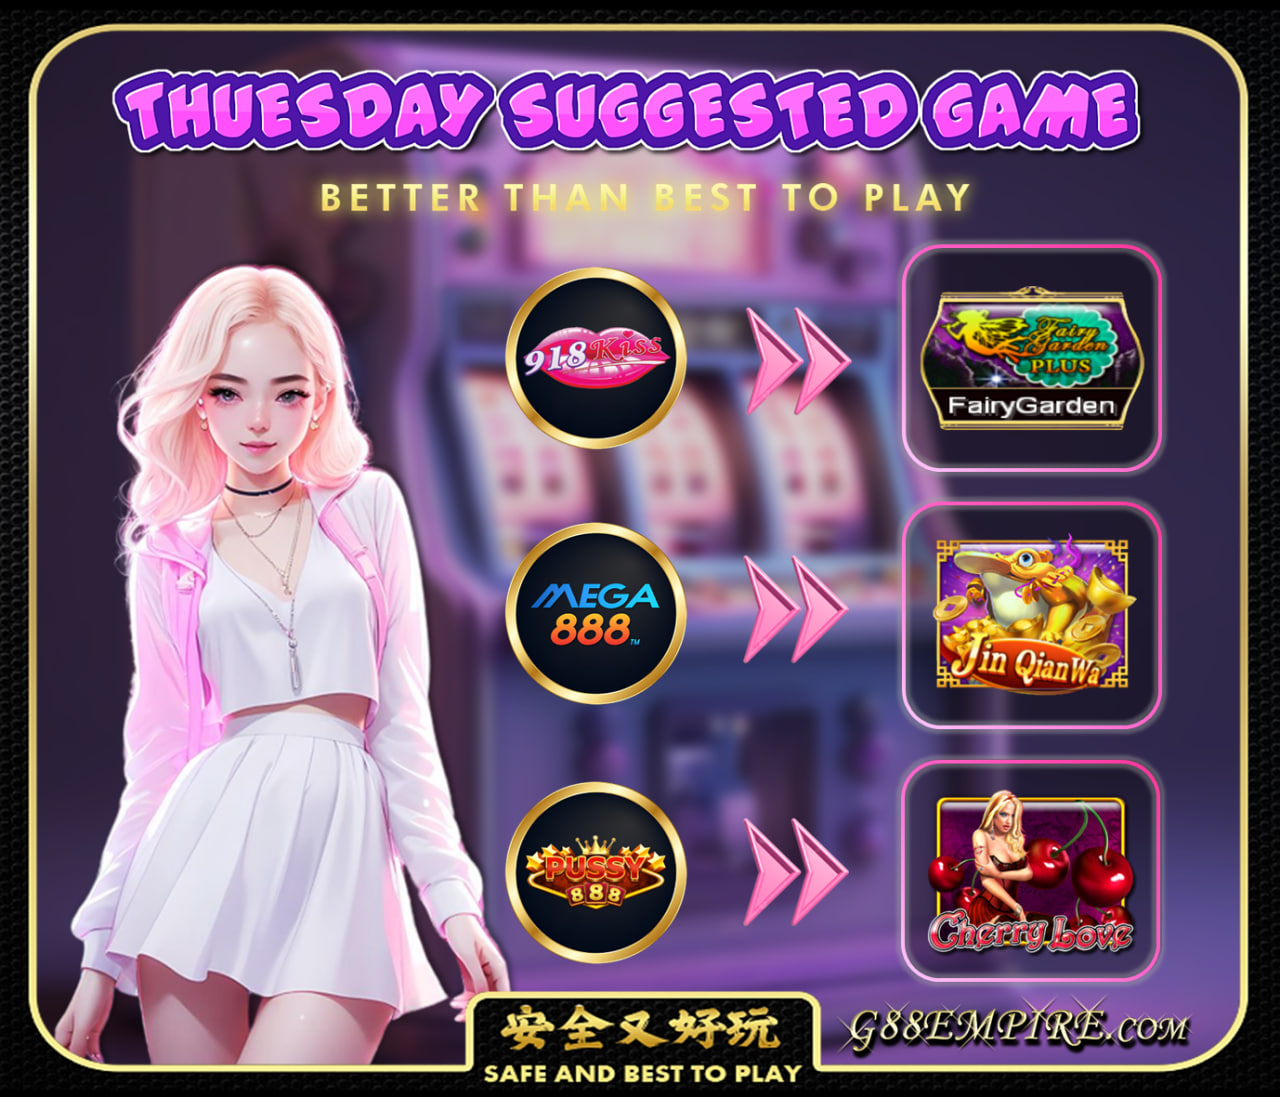 THUESDAY SUGGESTED GAME ( 09 NOV )